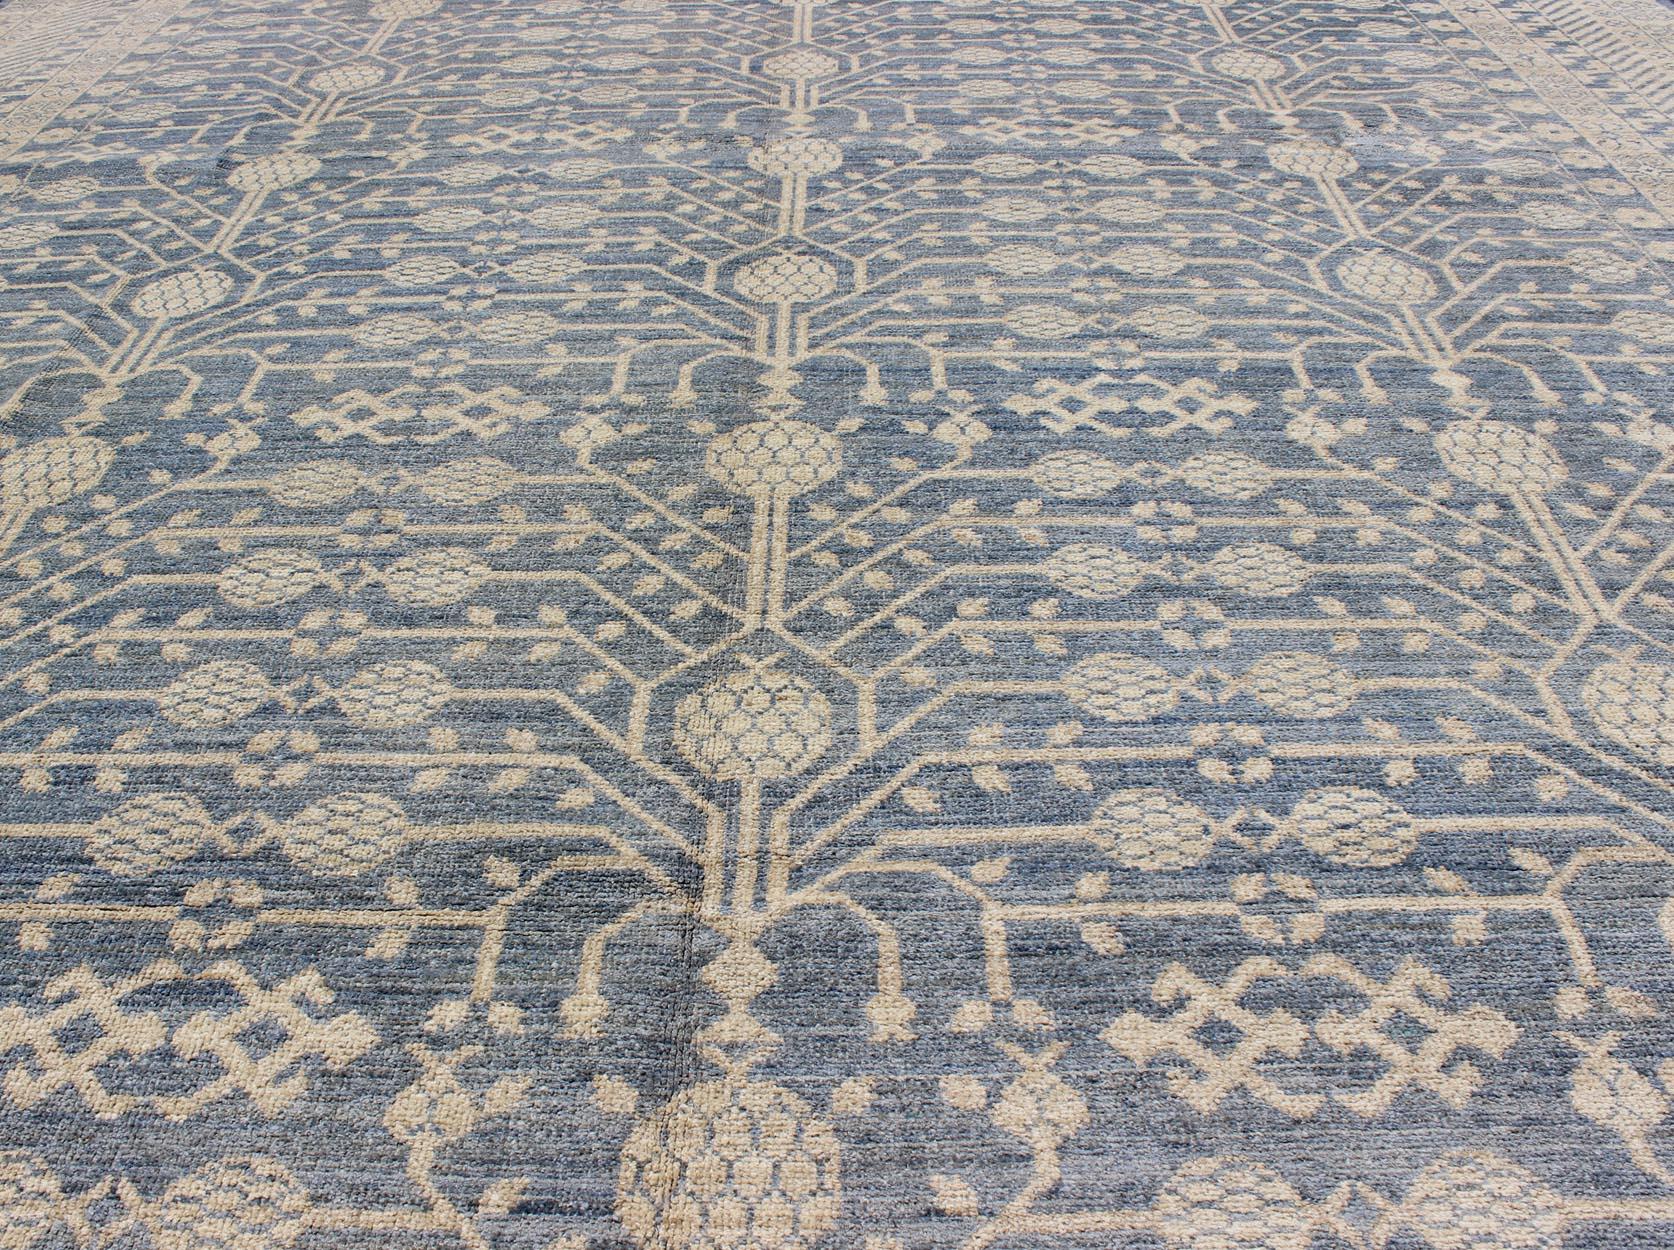 Contemporary Khotan Design Rug with All-Over Pomegranate Pattern in Blue, Tan & Taupe For Sale